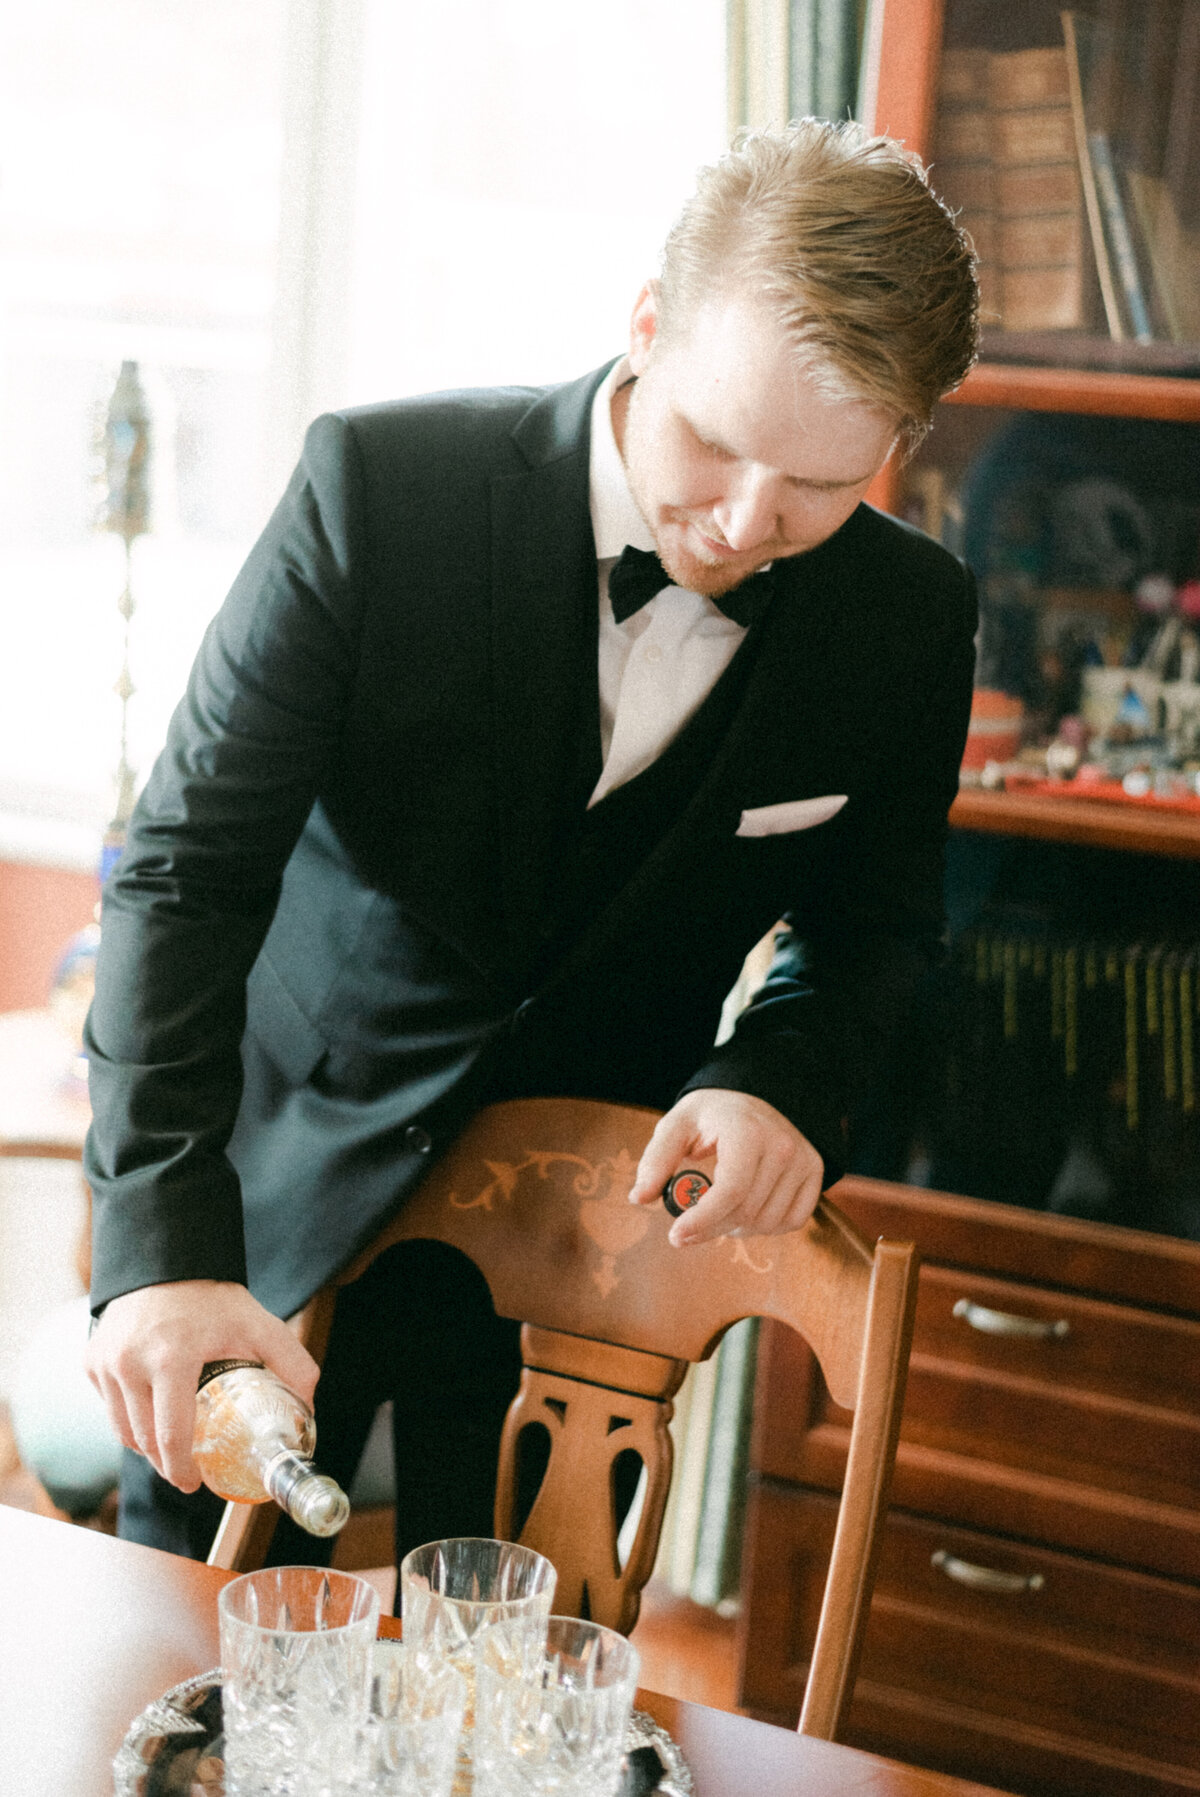 The groom is serving wisky in an image captured by wedding photographer Hannika Gabrielsson.